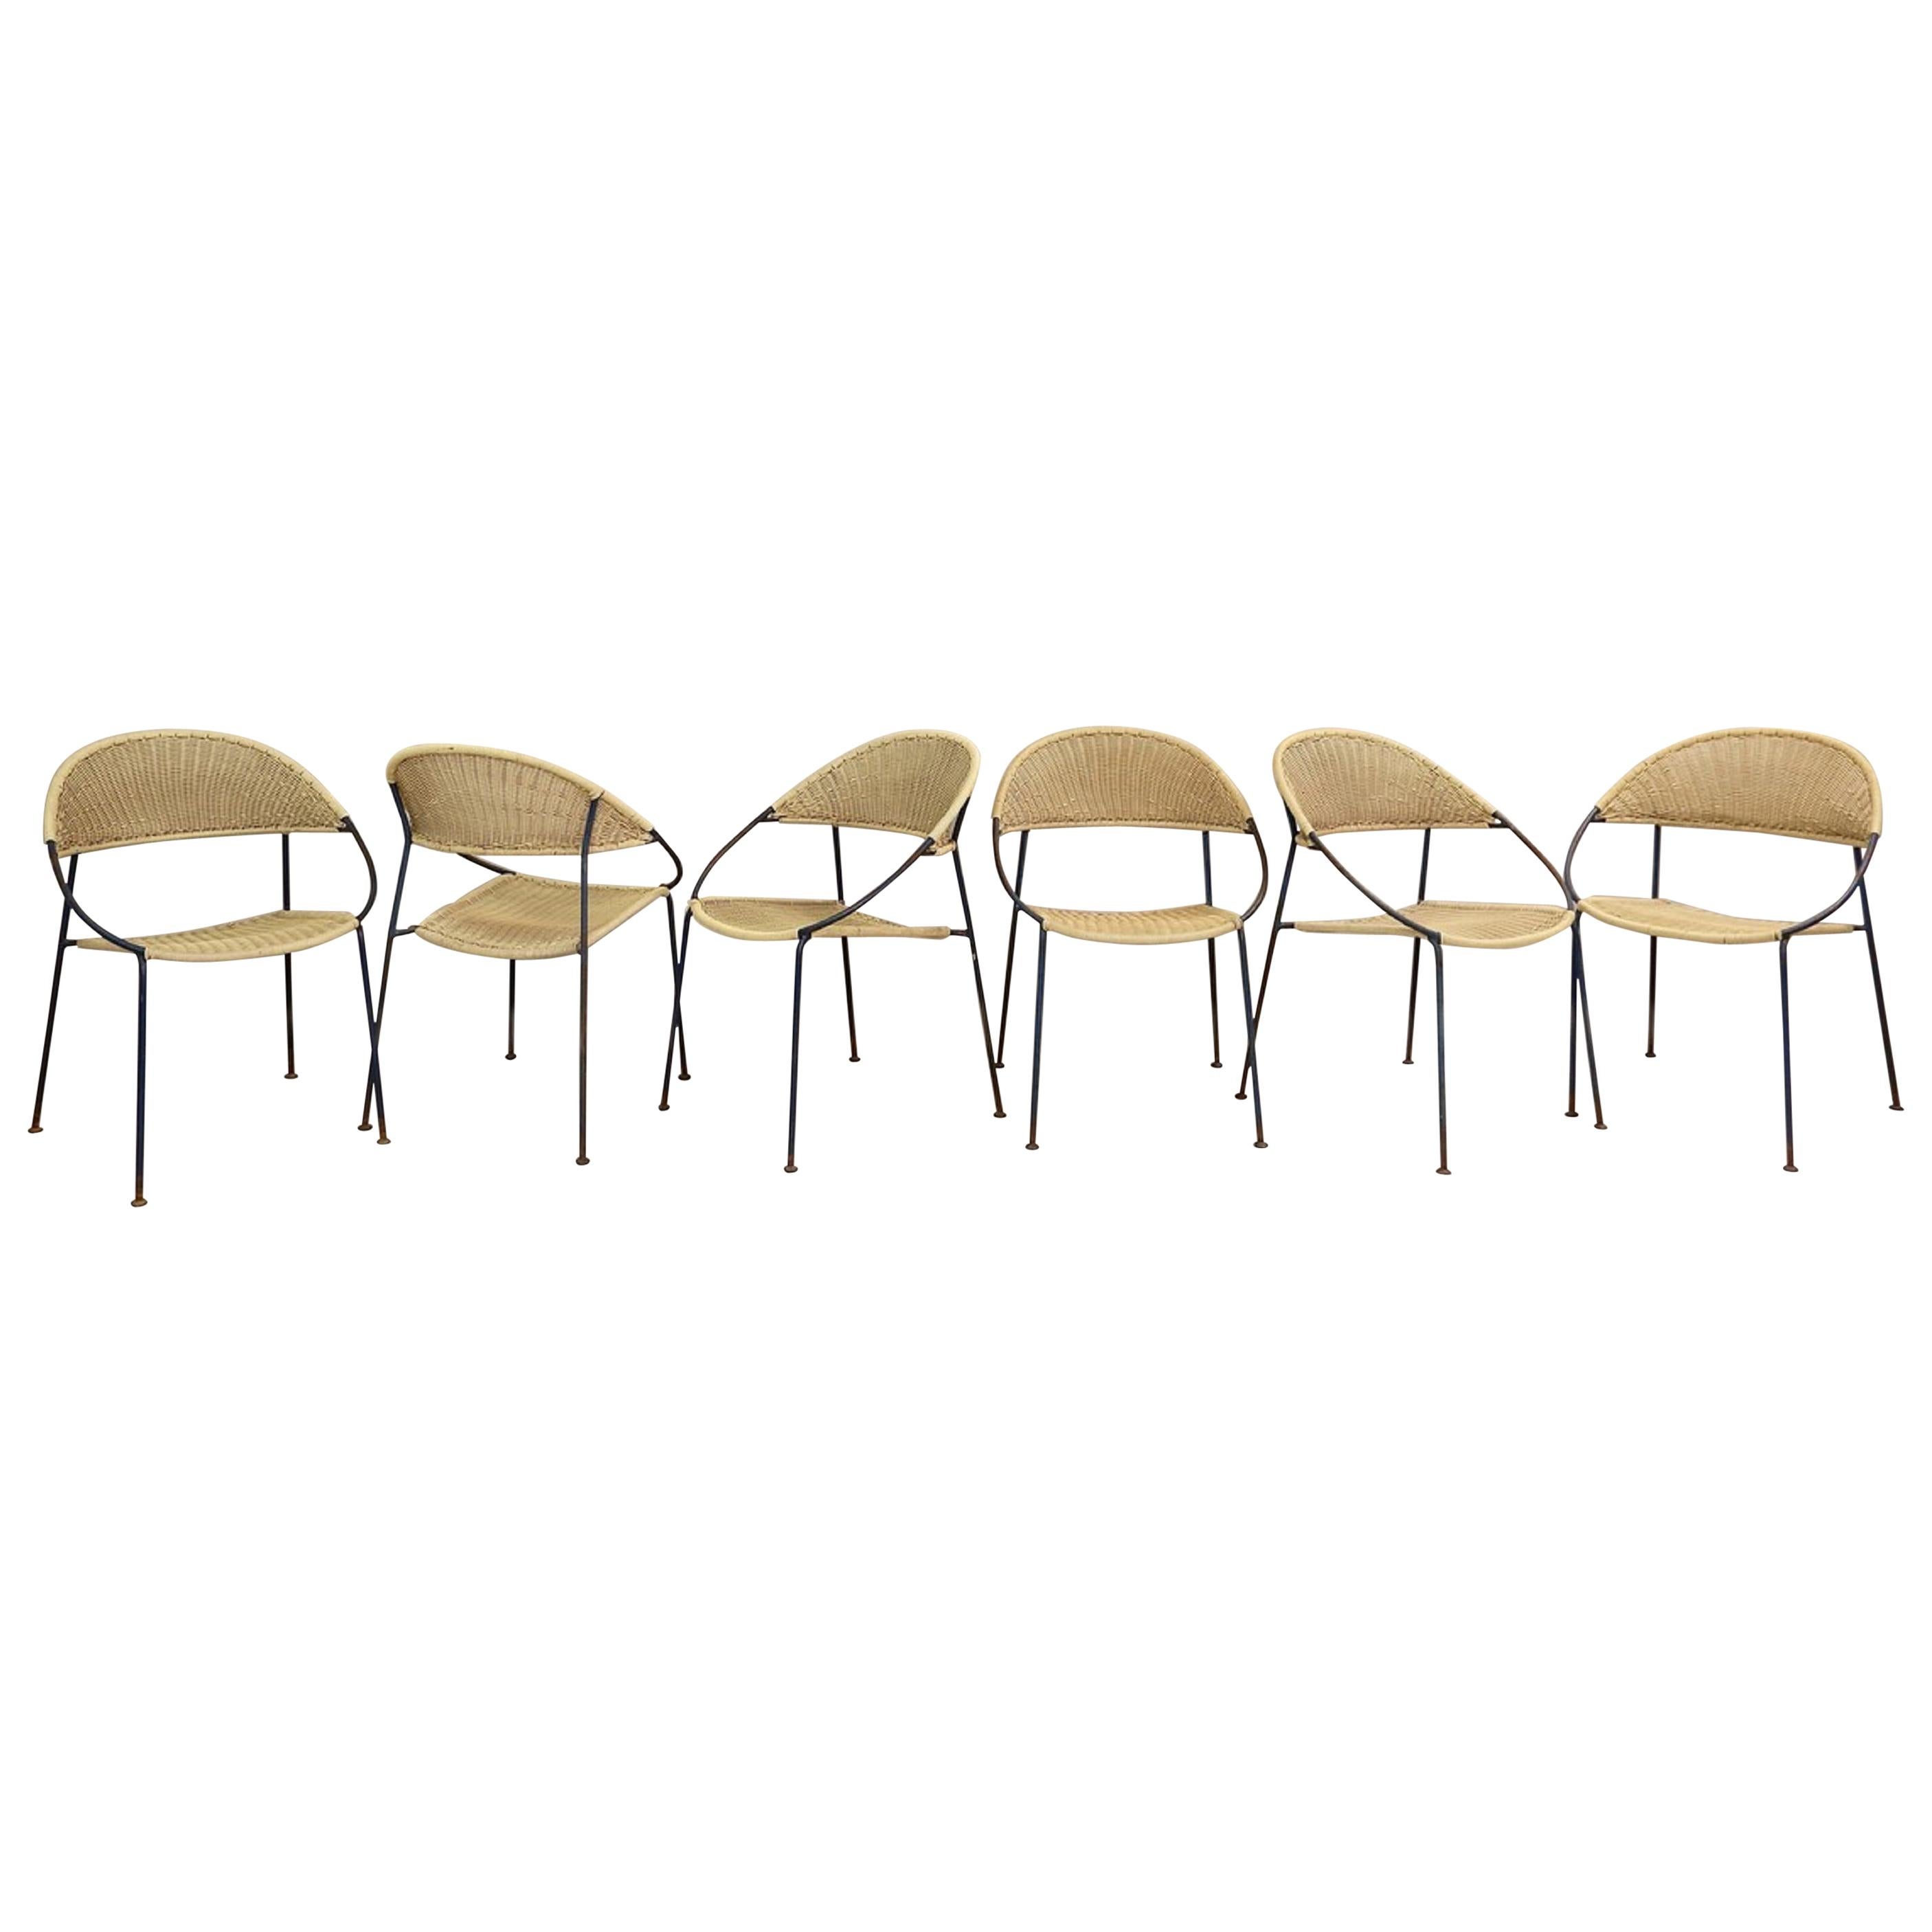 Set of 6 Chairs Model DU41 by Gastone Rinaldi for RIMA, Italy, 1956